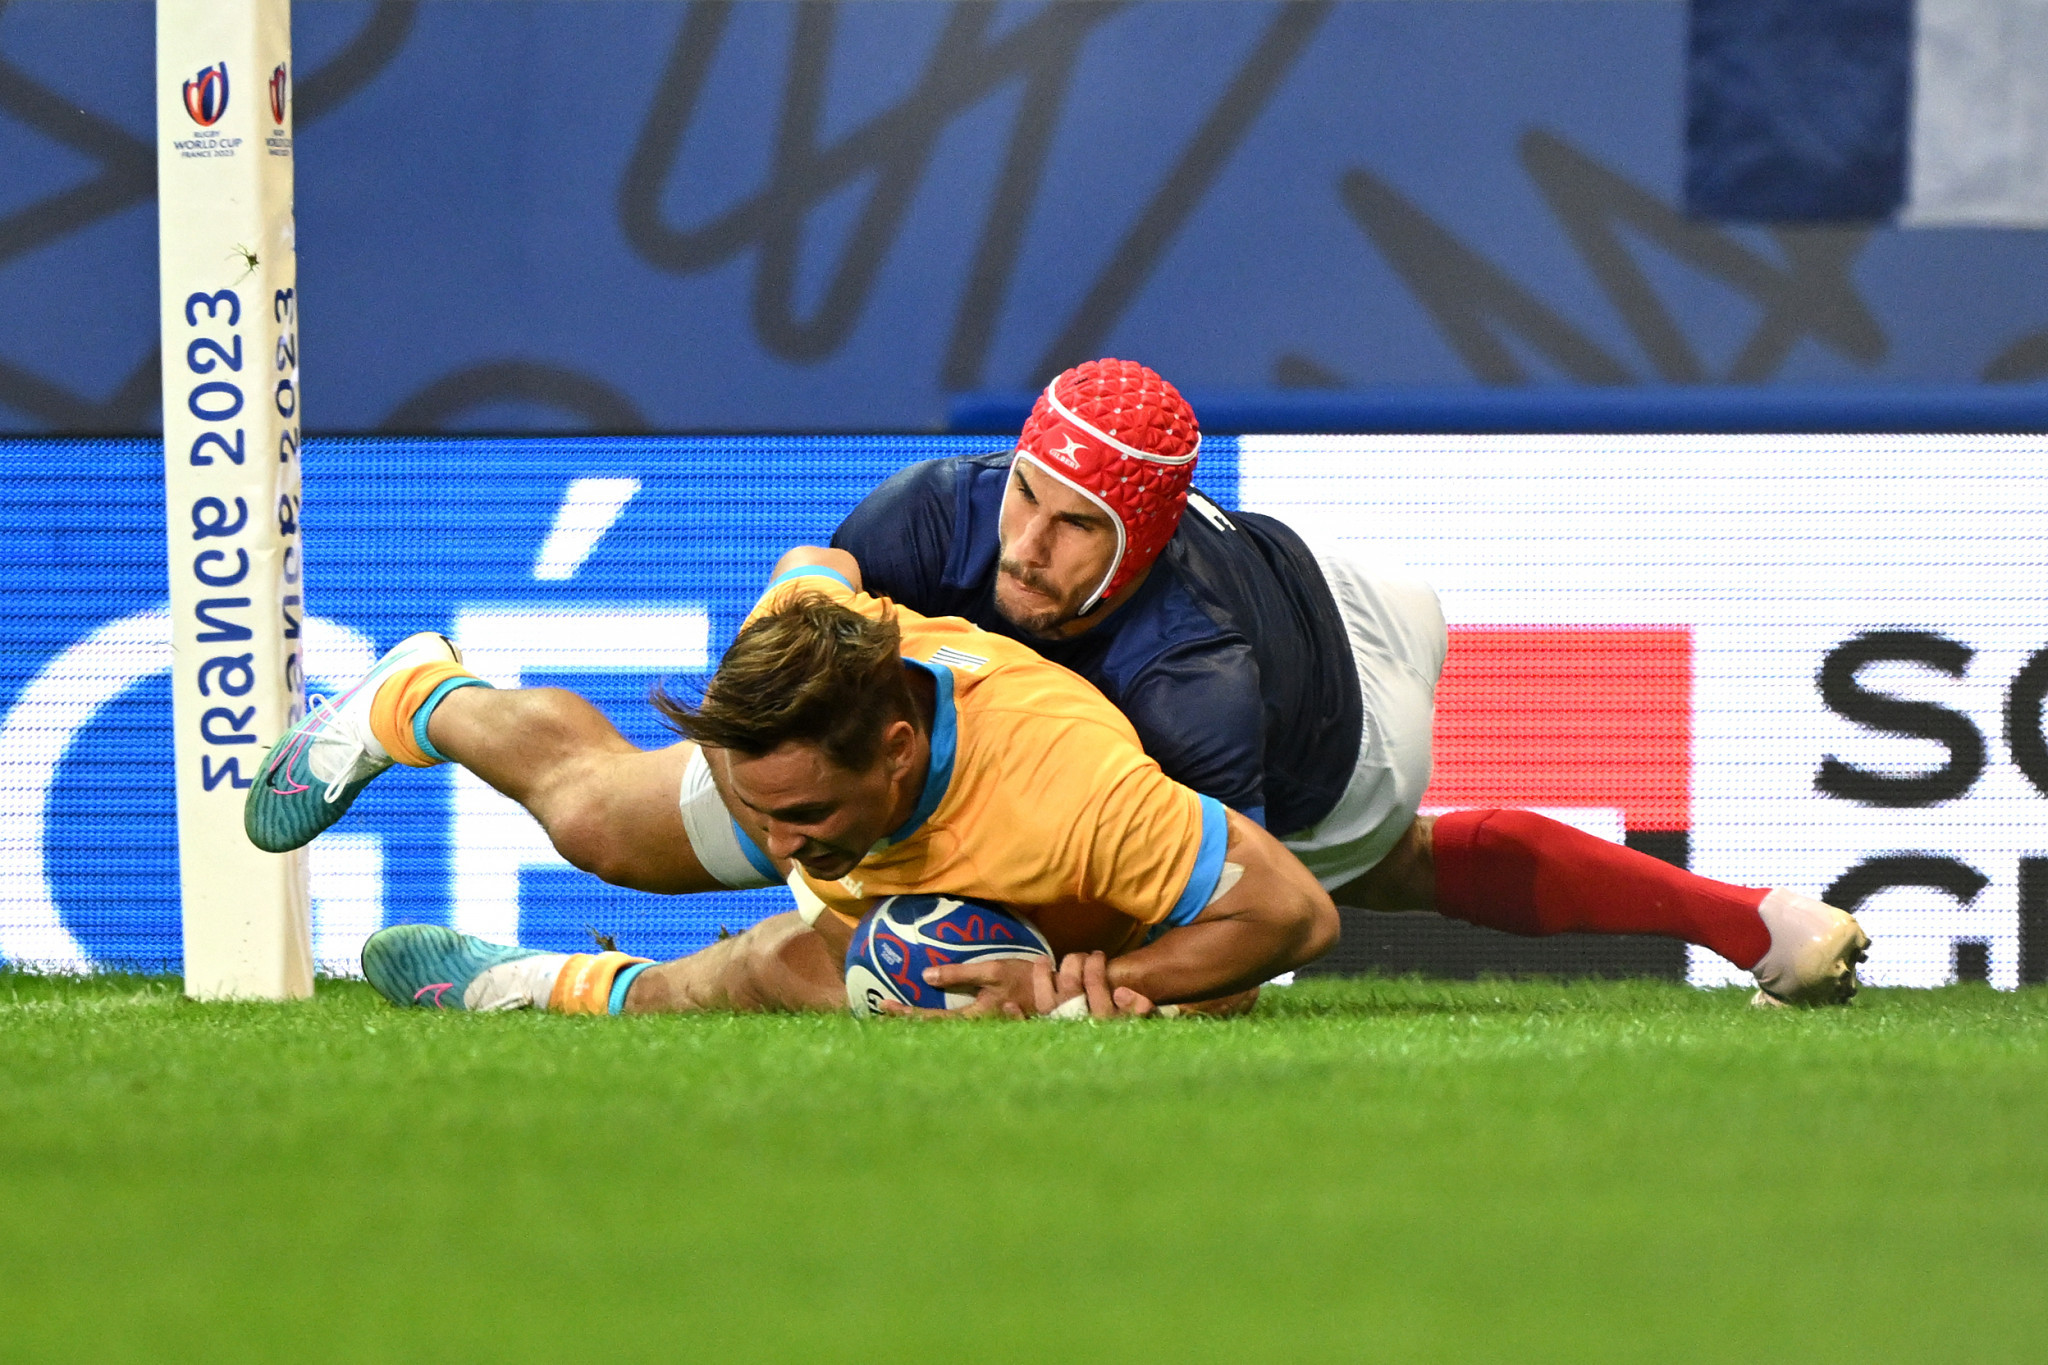 Freitas scores first try of match for Uruguay as hosts France win second fixture of Rugby World Cup 2023